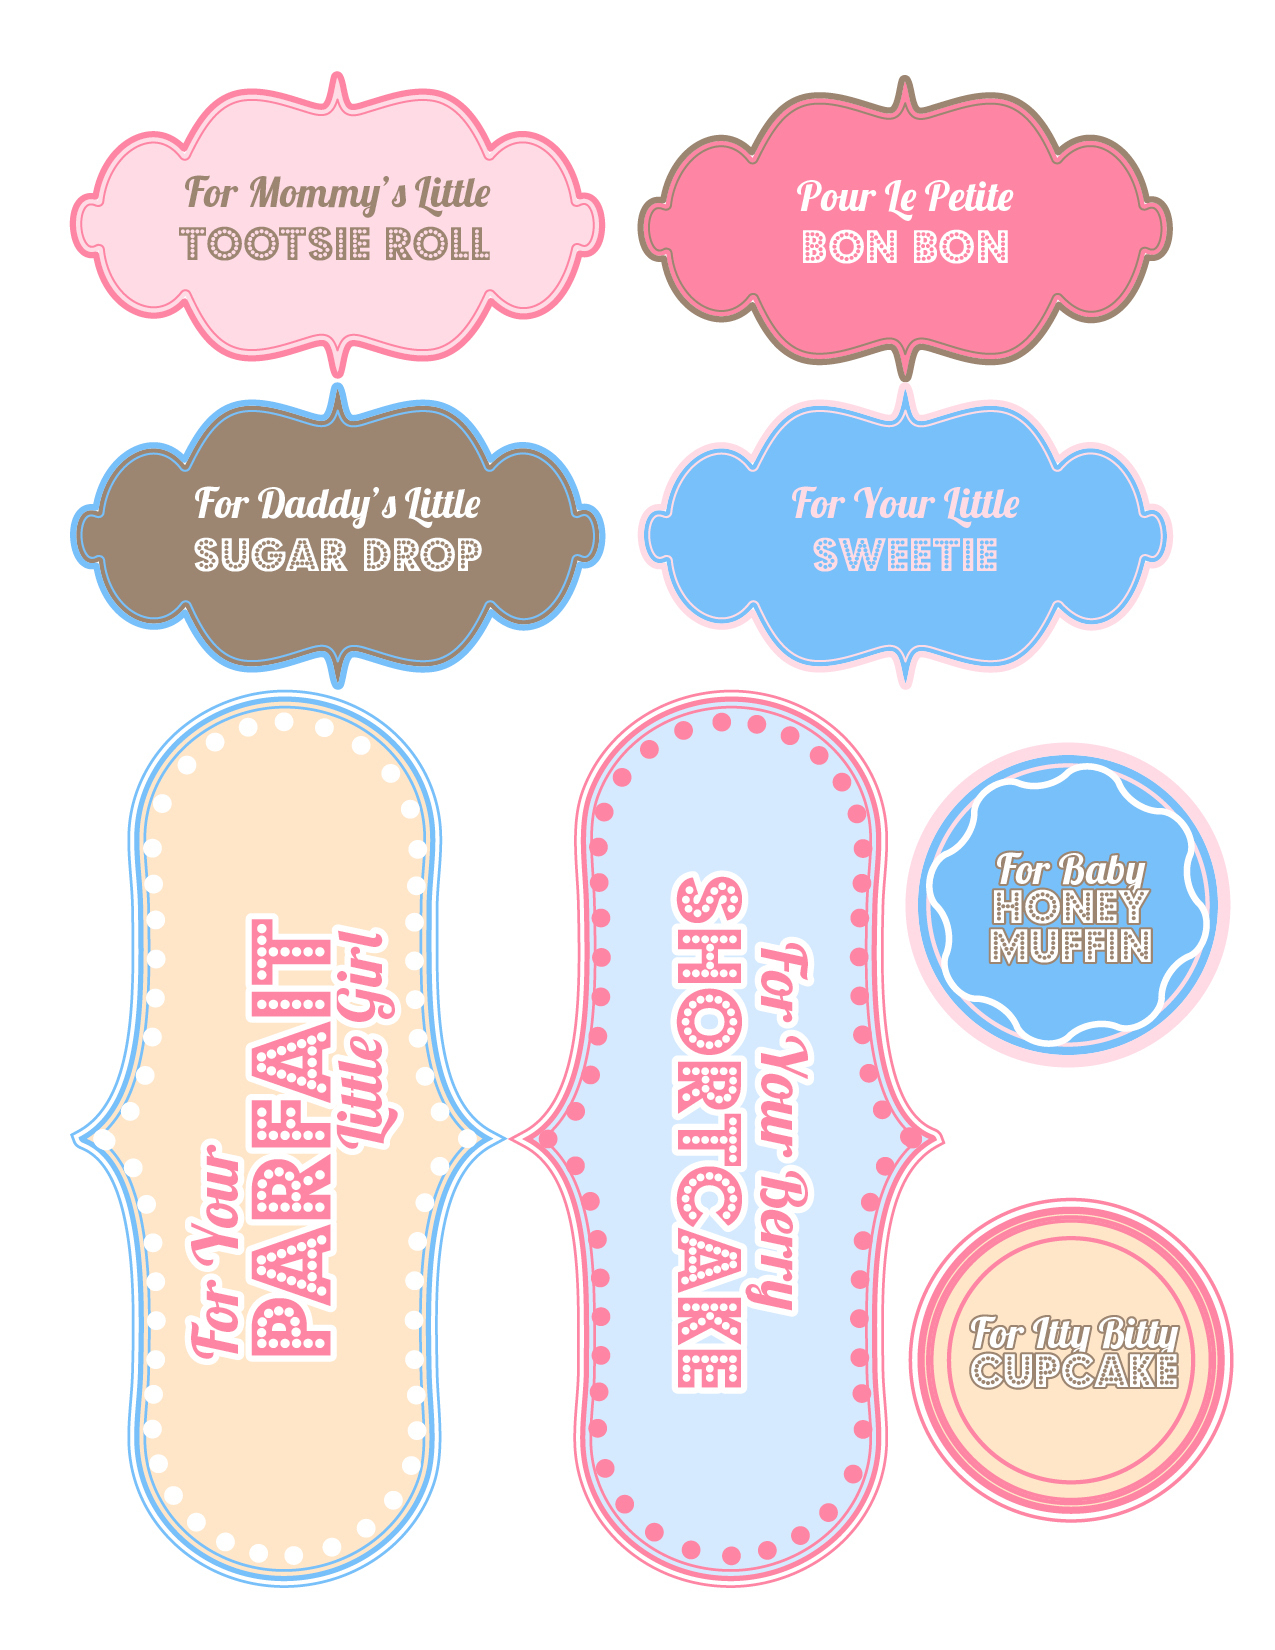 Baby Shower Gifts - [Free Printable] - Sweet Anne Designs - Free Printable Baby Shower Gift Tags